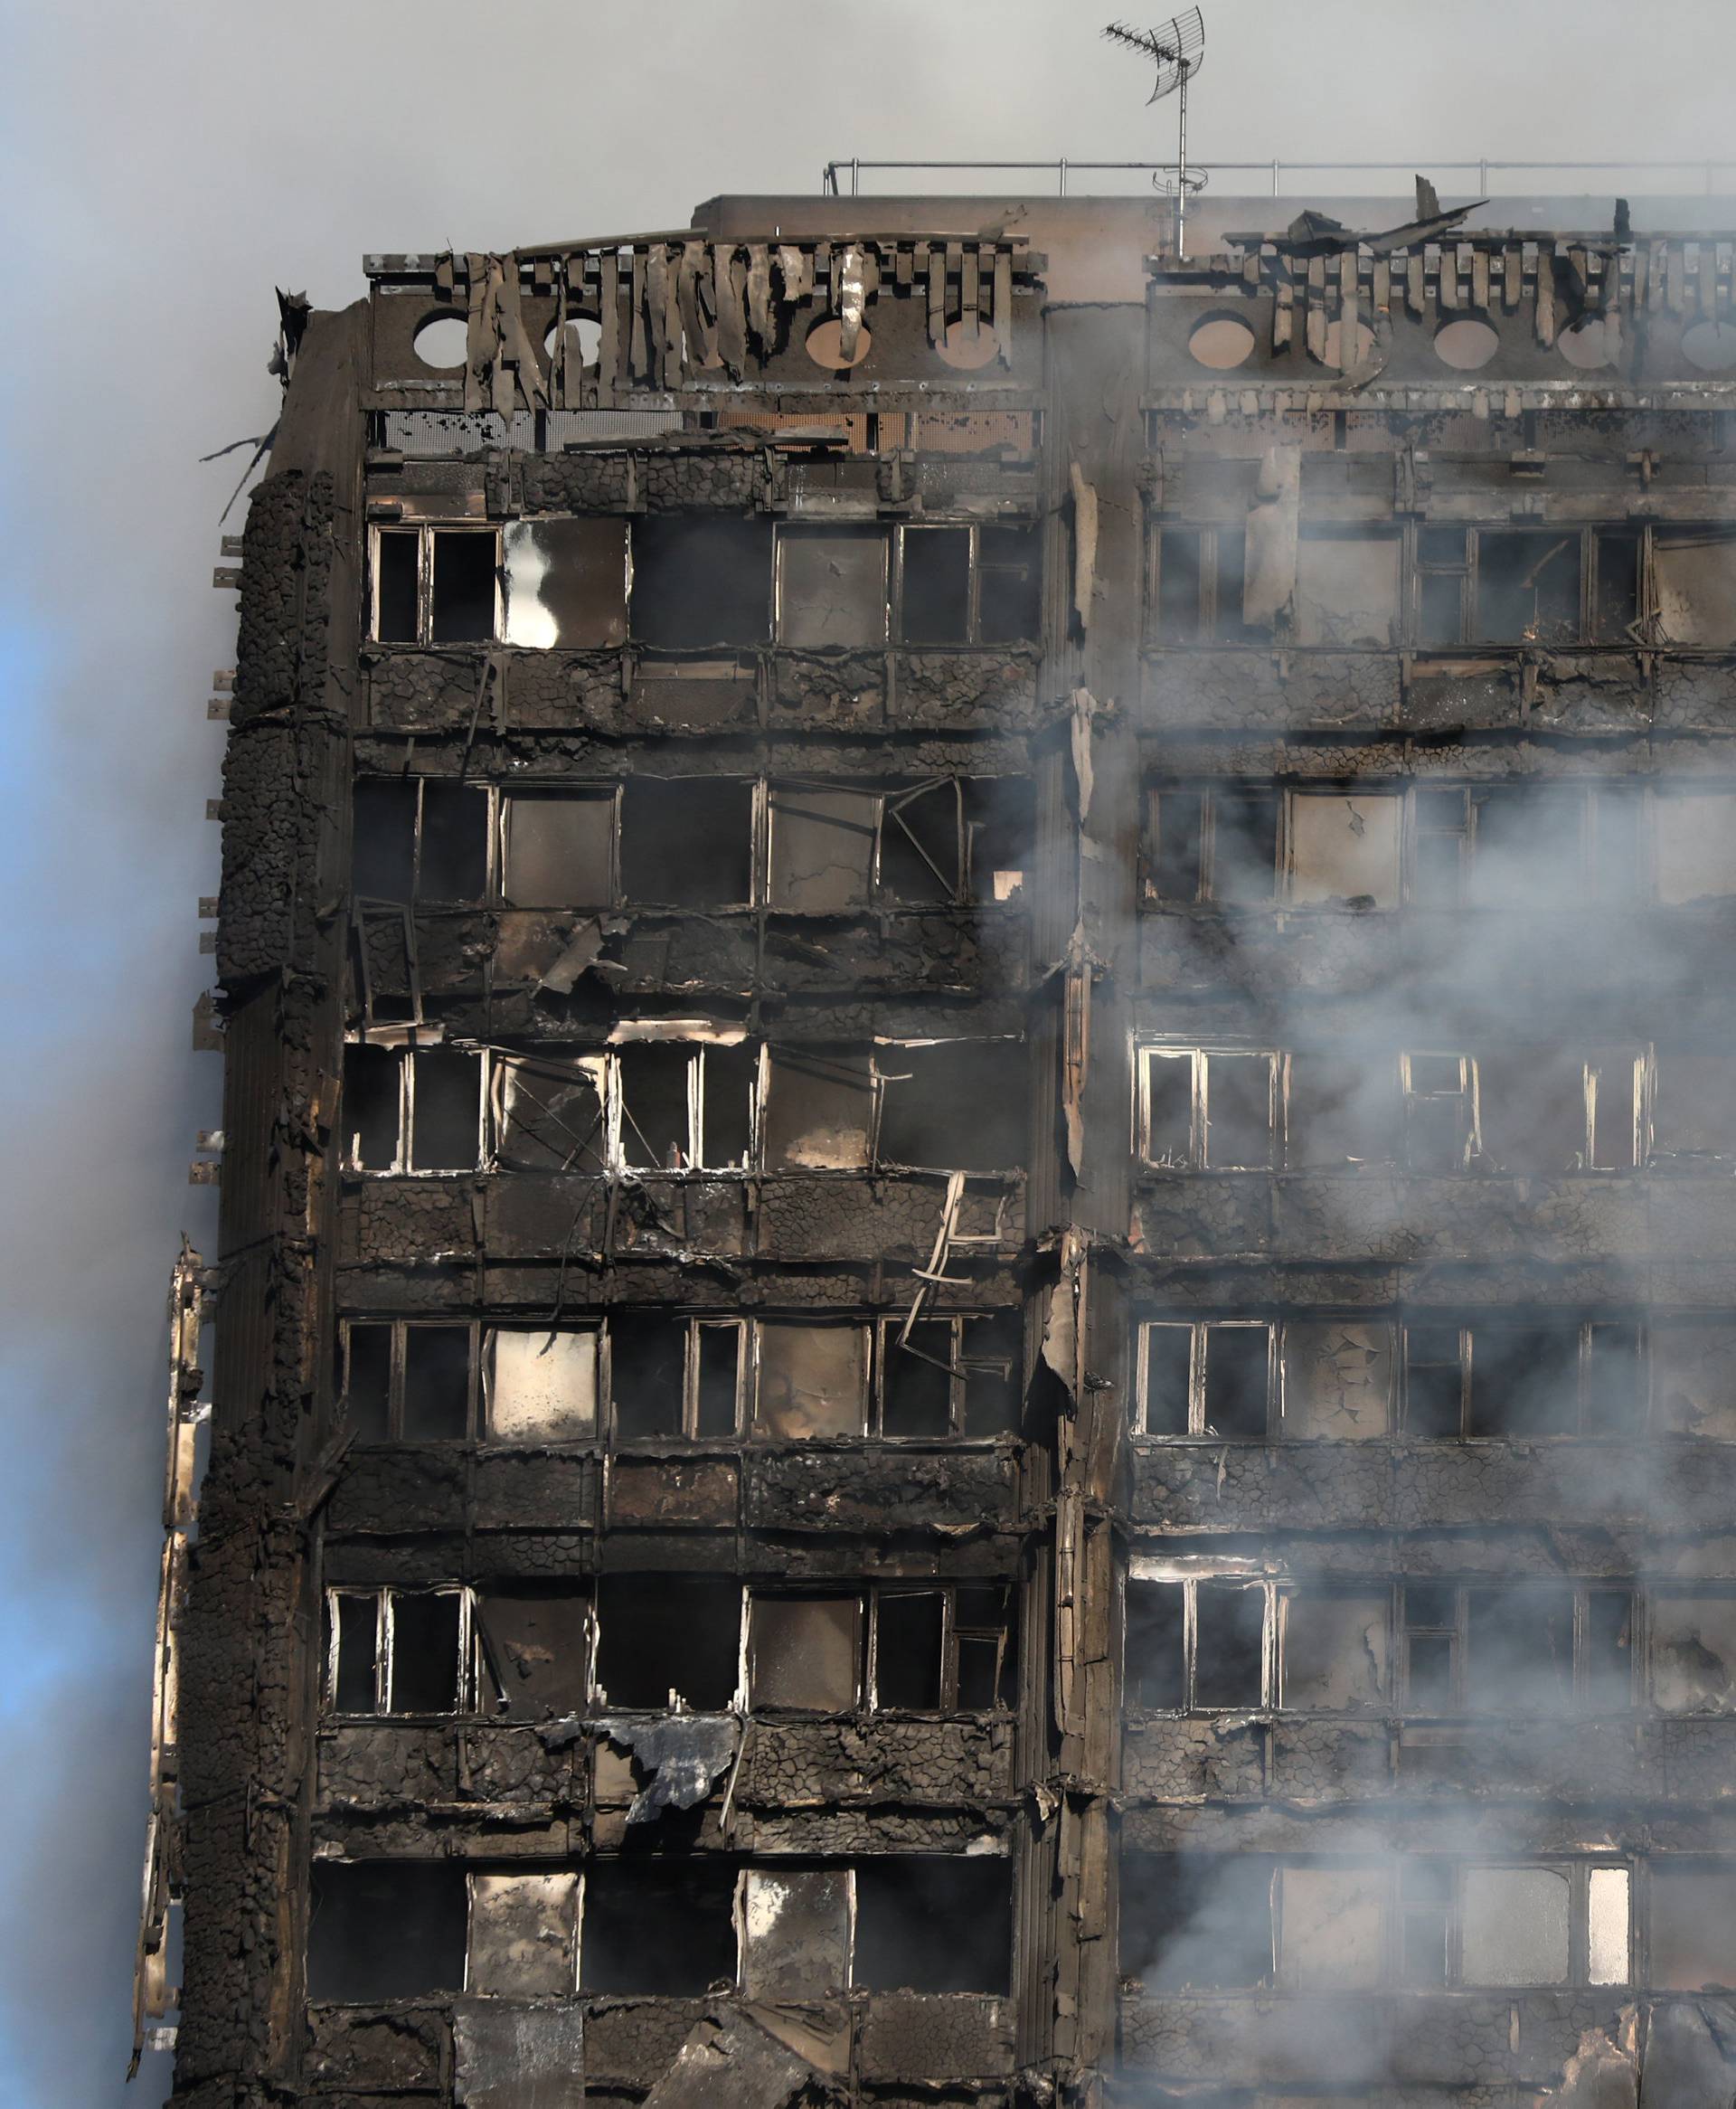 Smoke billows from a tower block severly damaged by a serious fire, in north Kensington, West London